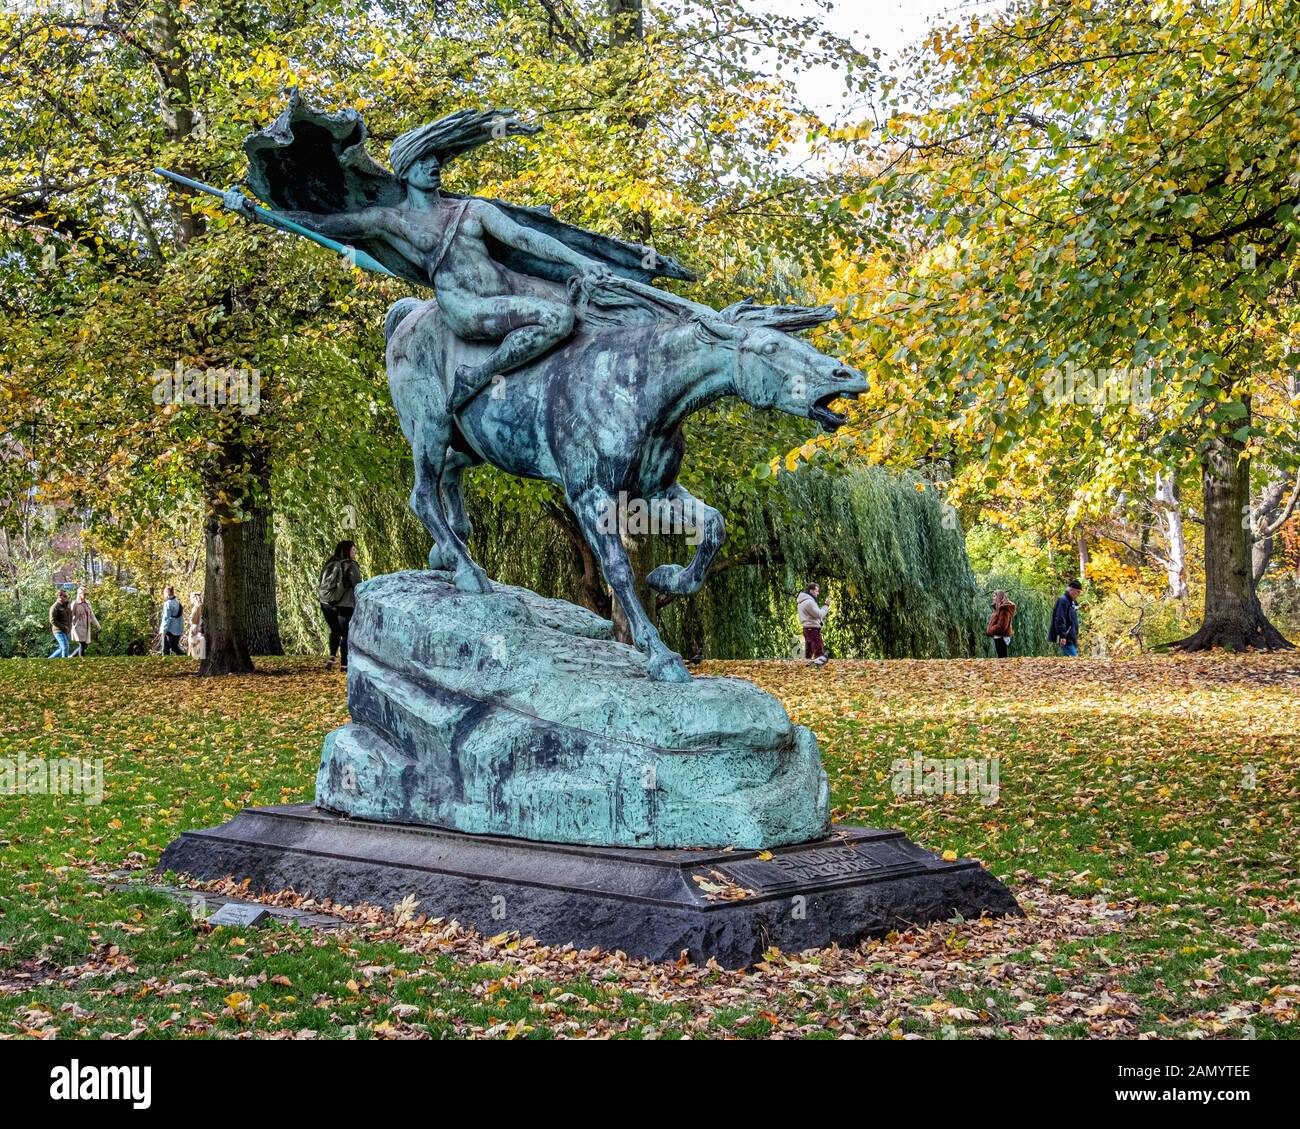 Bronze statue of a valkyrie, a female figure in Norse mythology designed by sculptor Stephan Sinding 1908 in Churchill park, Copehhagen, Denmark Stock Photo